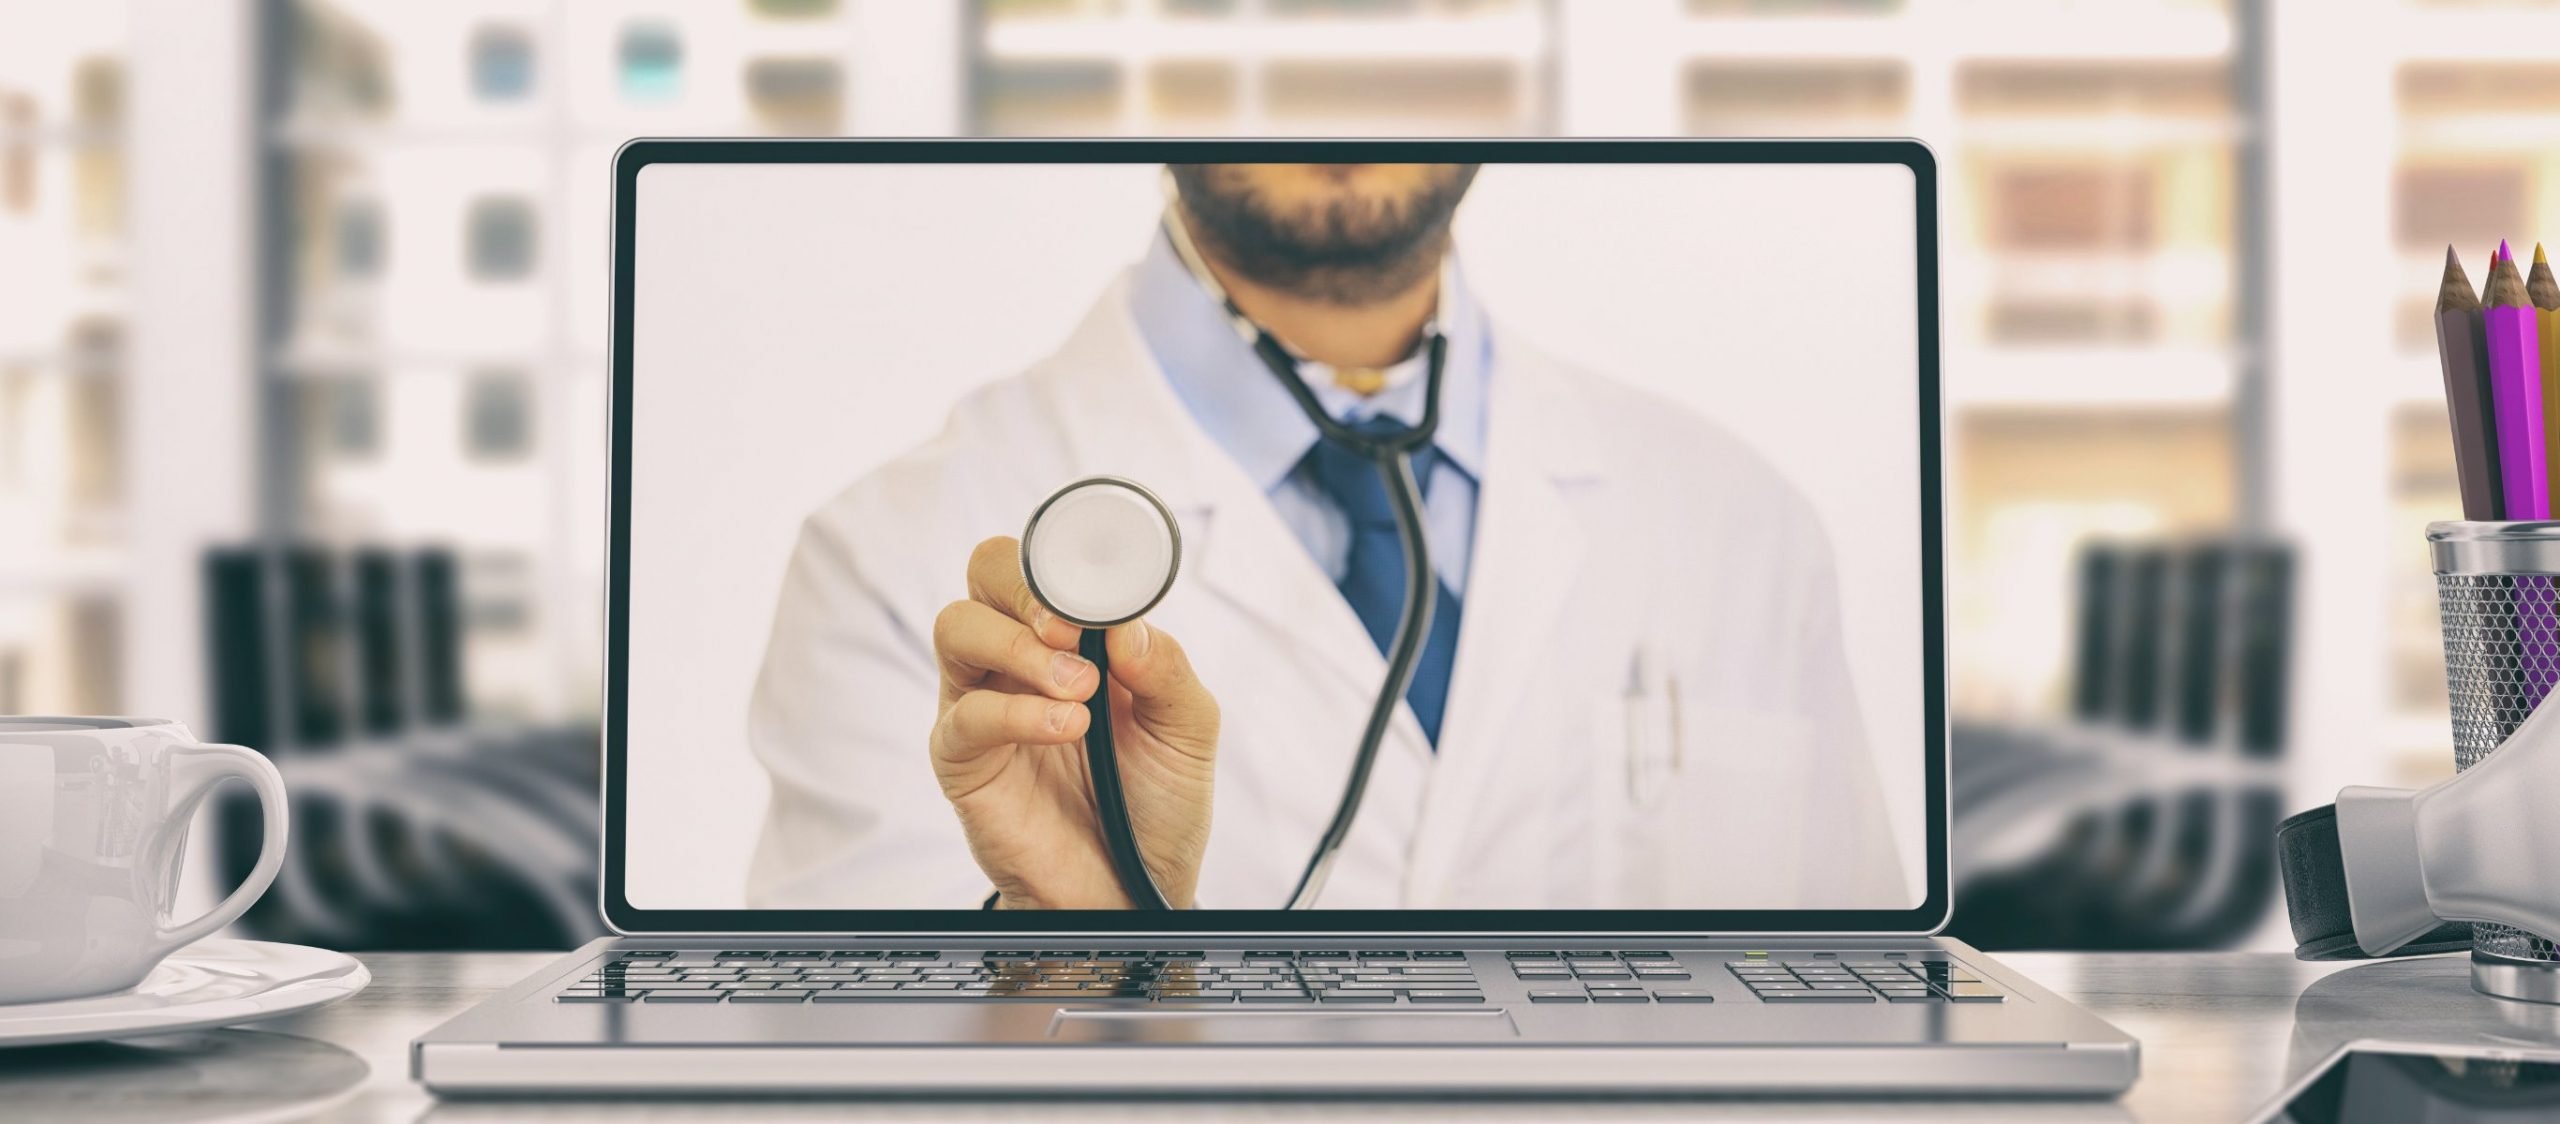 Competition Authority Recommends Enhancing Telemedicine Access